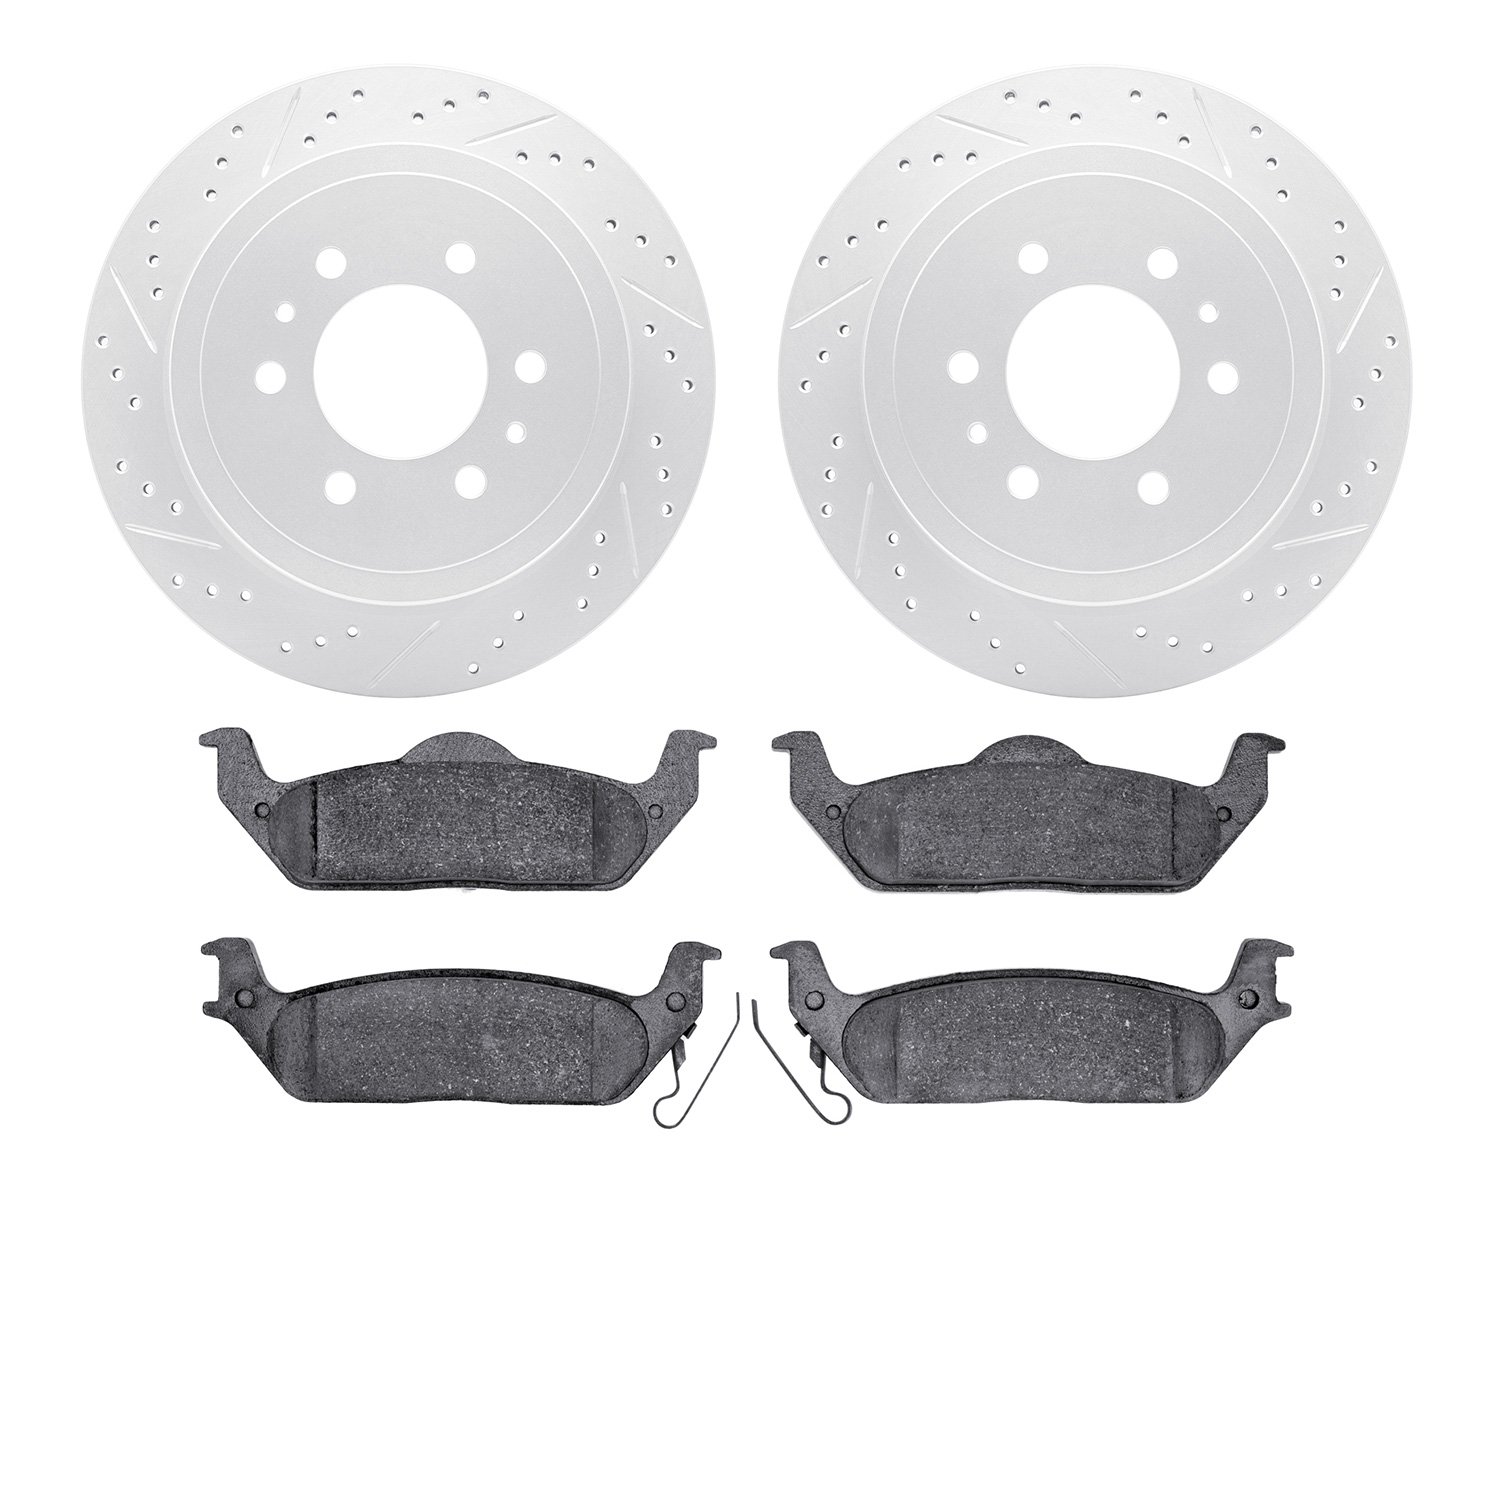 2502-54162 Geoperformance Drilled/Slotted Rotors w/5000 Advanced Brake Pads Kit, 2004-2009 Ford/Lincoln/Mercury/Mazda, Position: